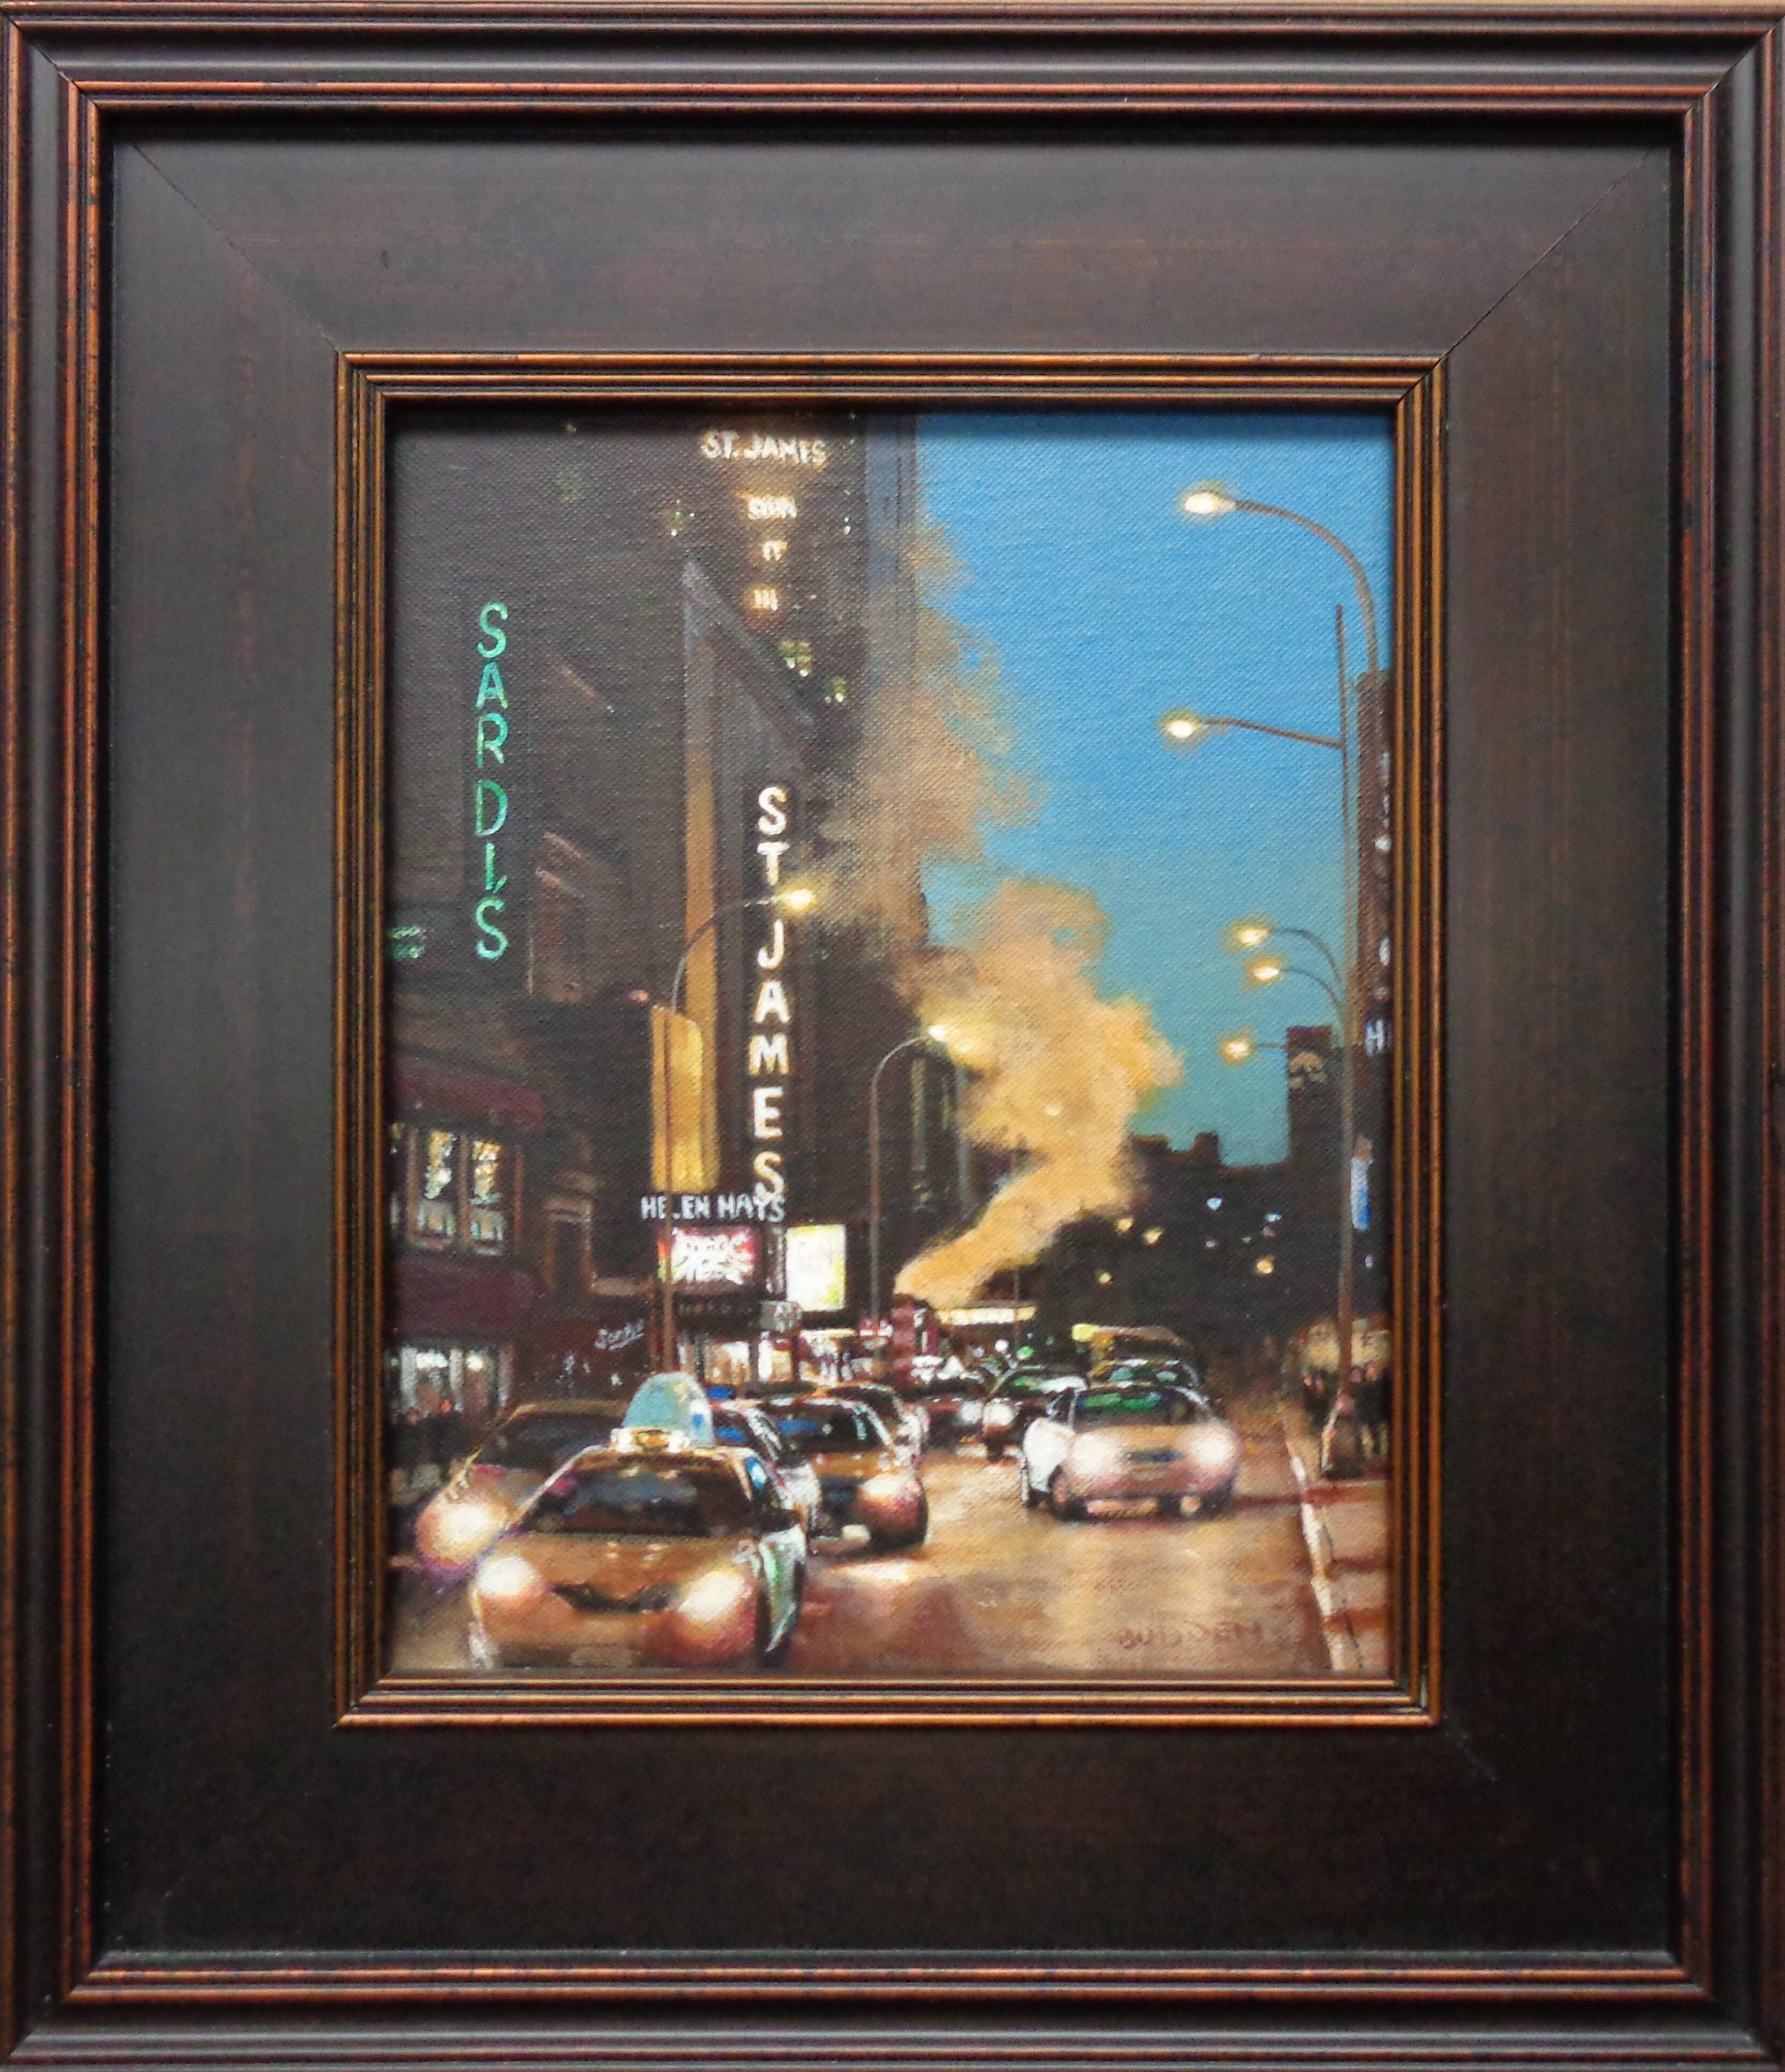 Evening On Broadway, St. James & Sardi's
Image is 10 x 8 unframed, 15.5 x 13.5 framed.
  An  acrylic painting on canvas panel by award winning contemporary artist Michael Budden that showcases a nocturne on Broadway in NYC. After attending a play,